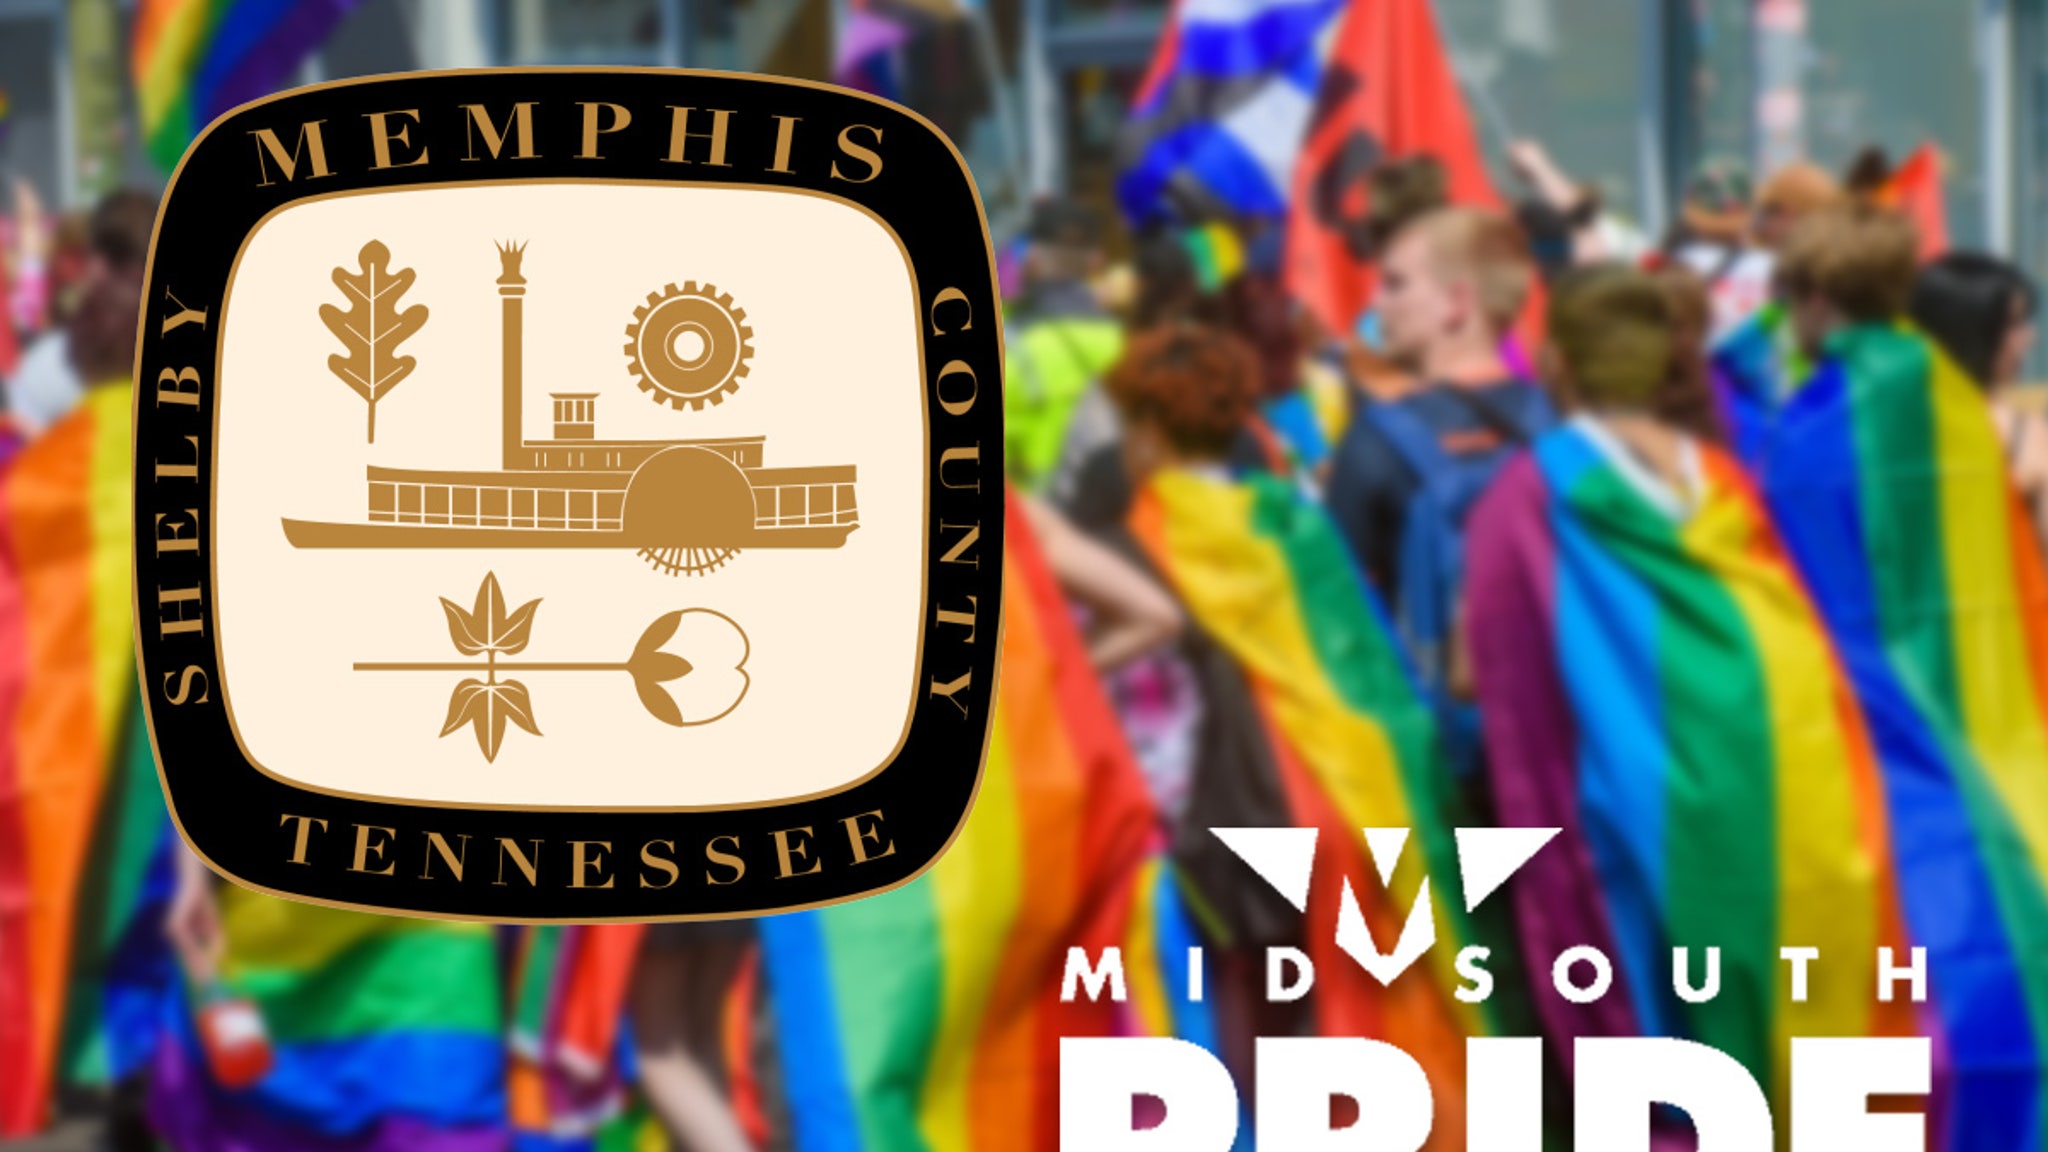 Tennessee Pride event faces threat from Aryan Nations ahead of festival, security tightened